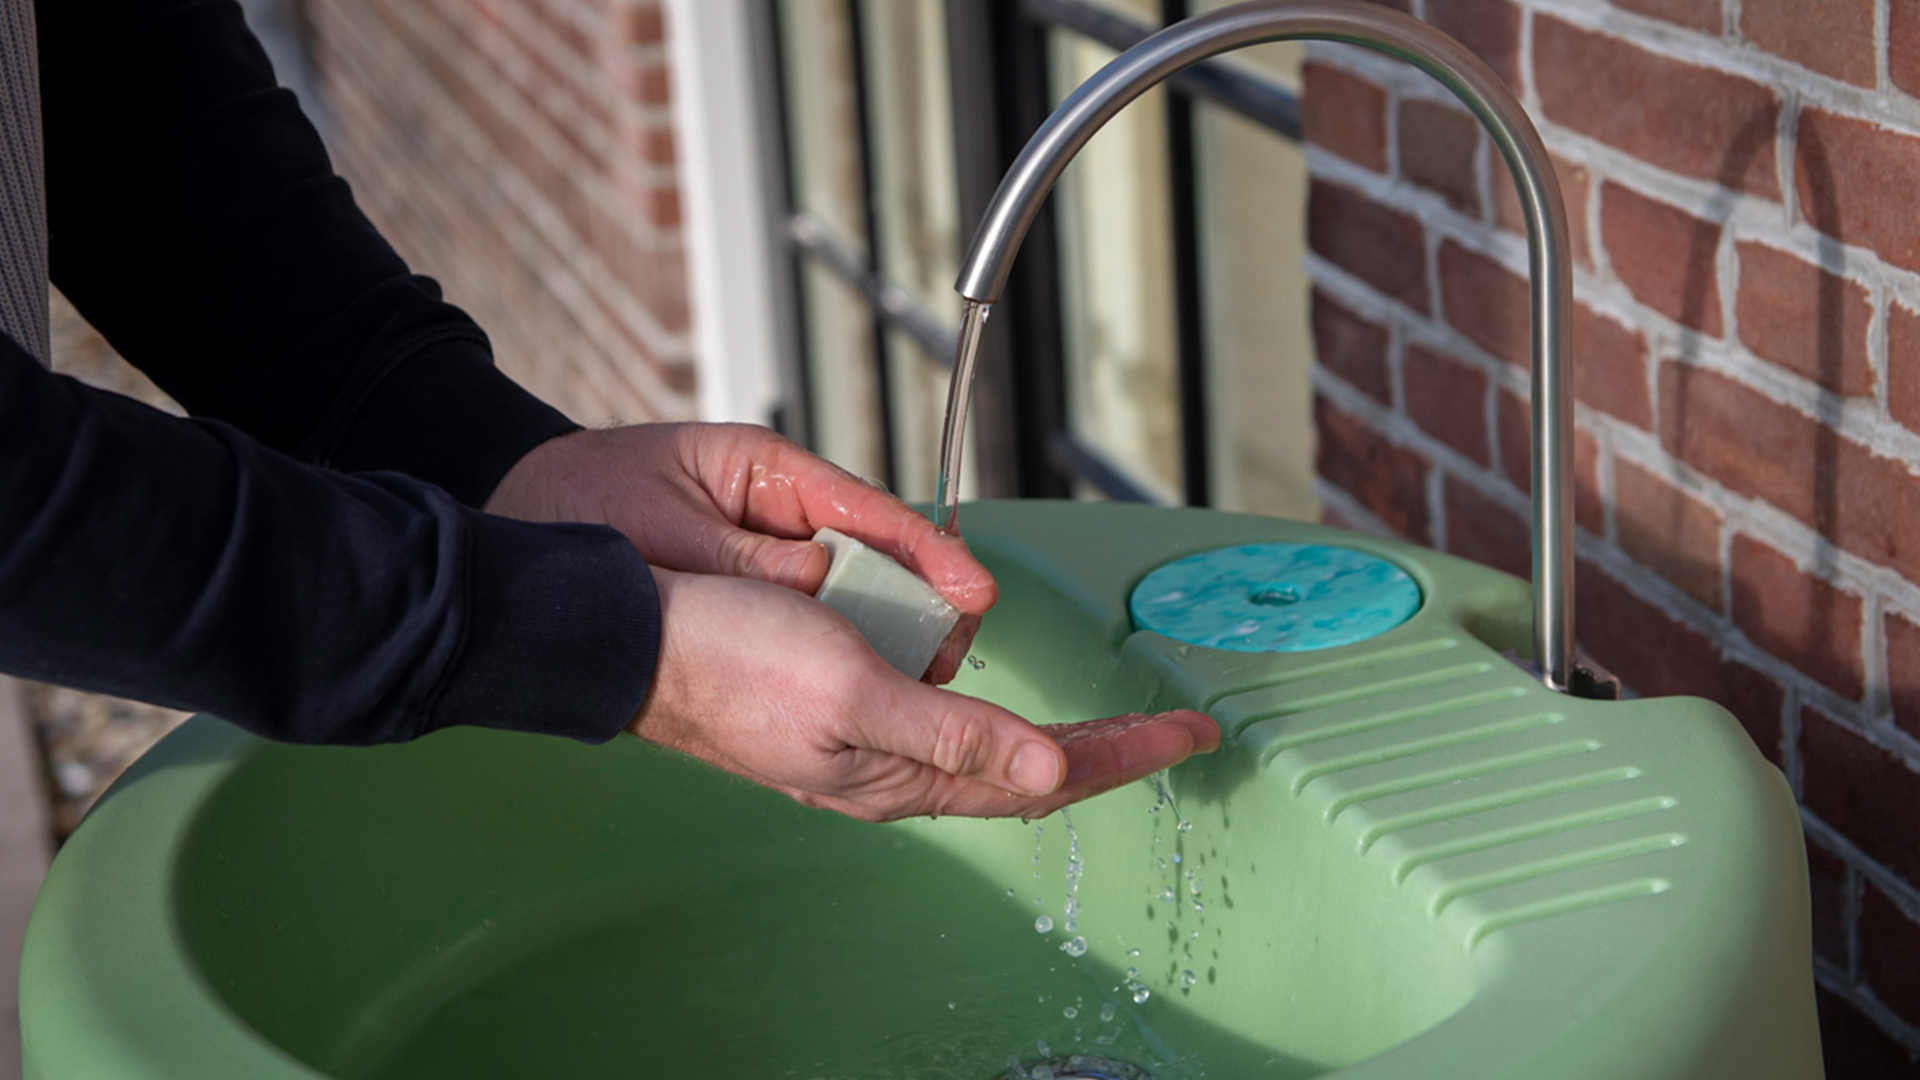 By filling it up with fresh water or connecting it to your outdoor watertap with the optional freshwatertap. Flexible for every (public) location.